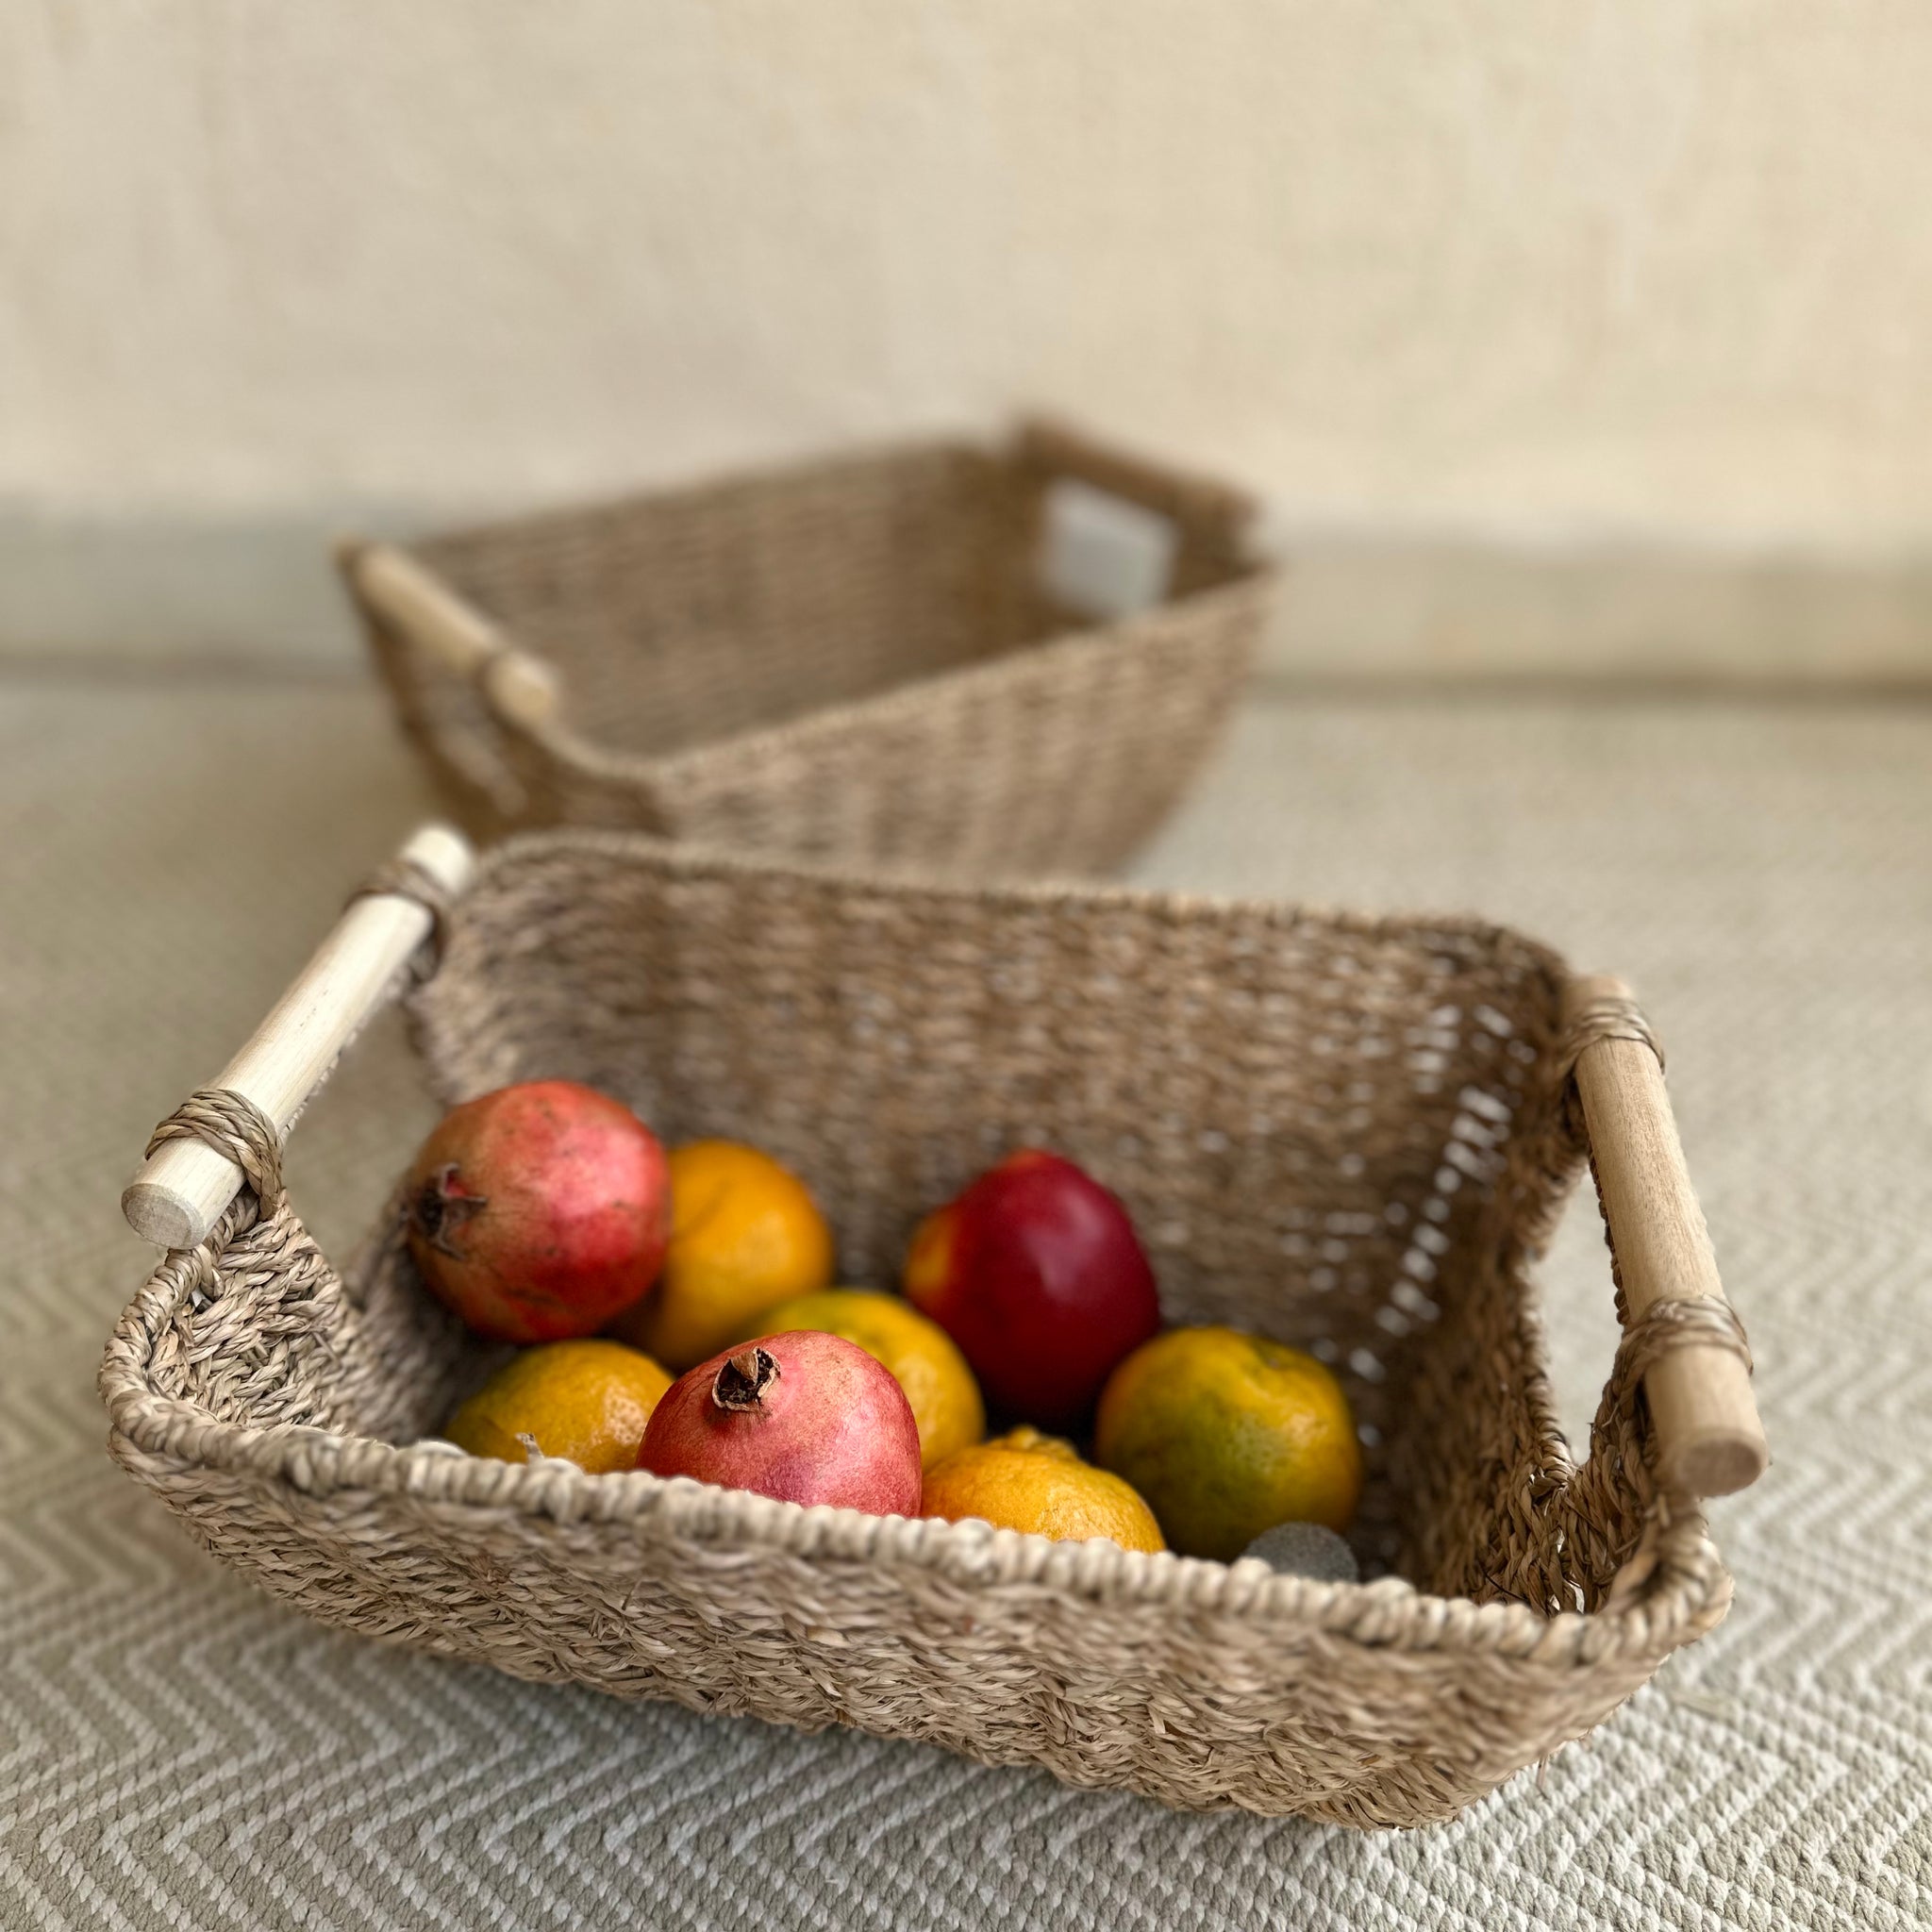 Seagrass Tray Basket with Wooden Handle